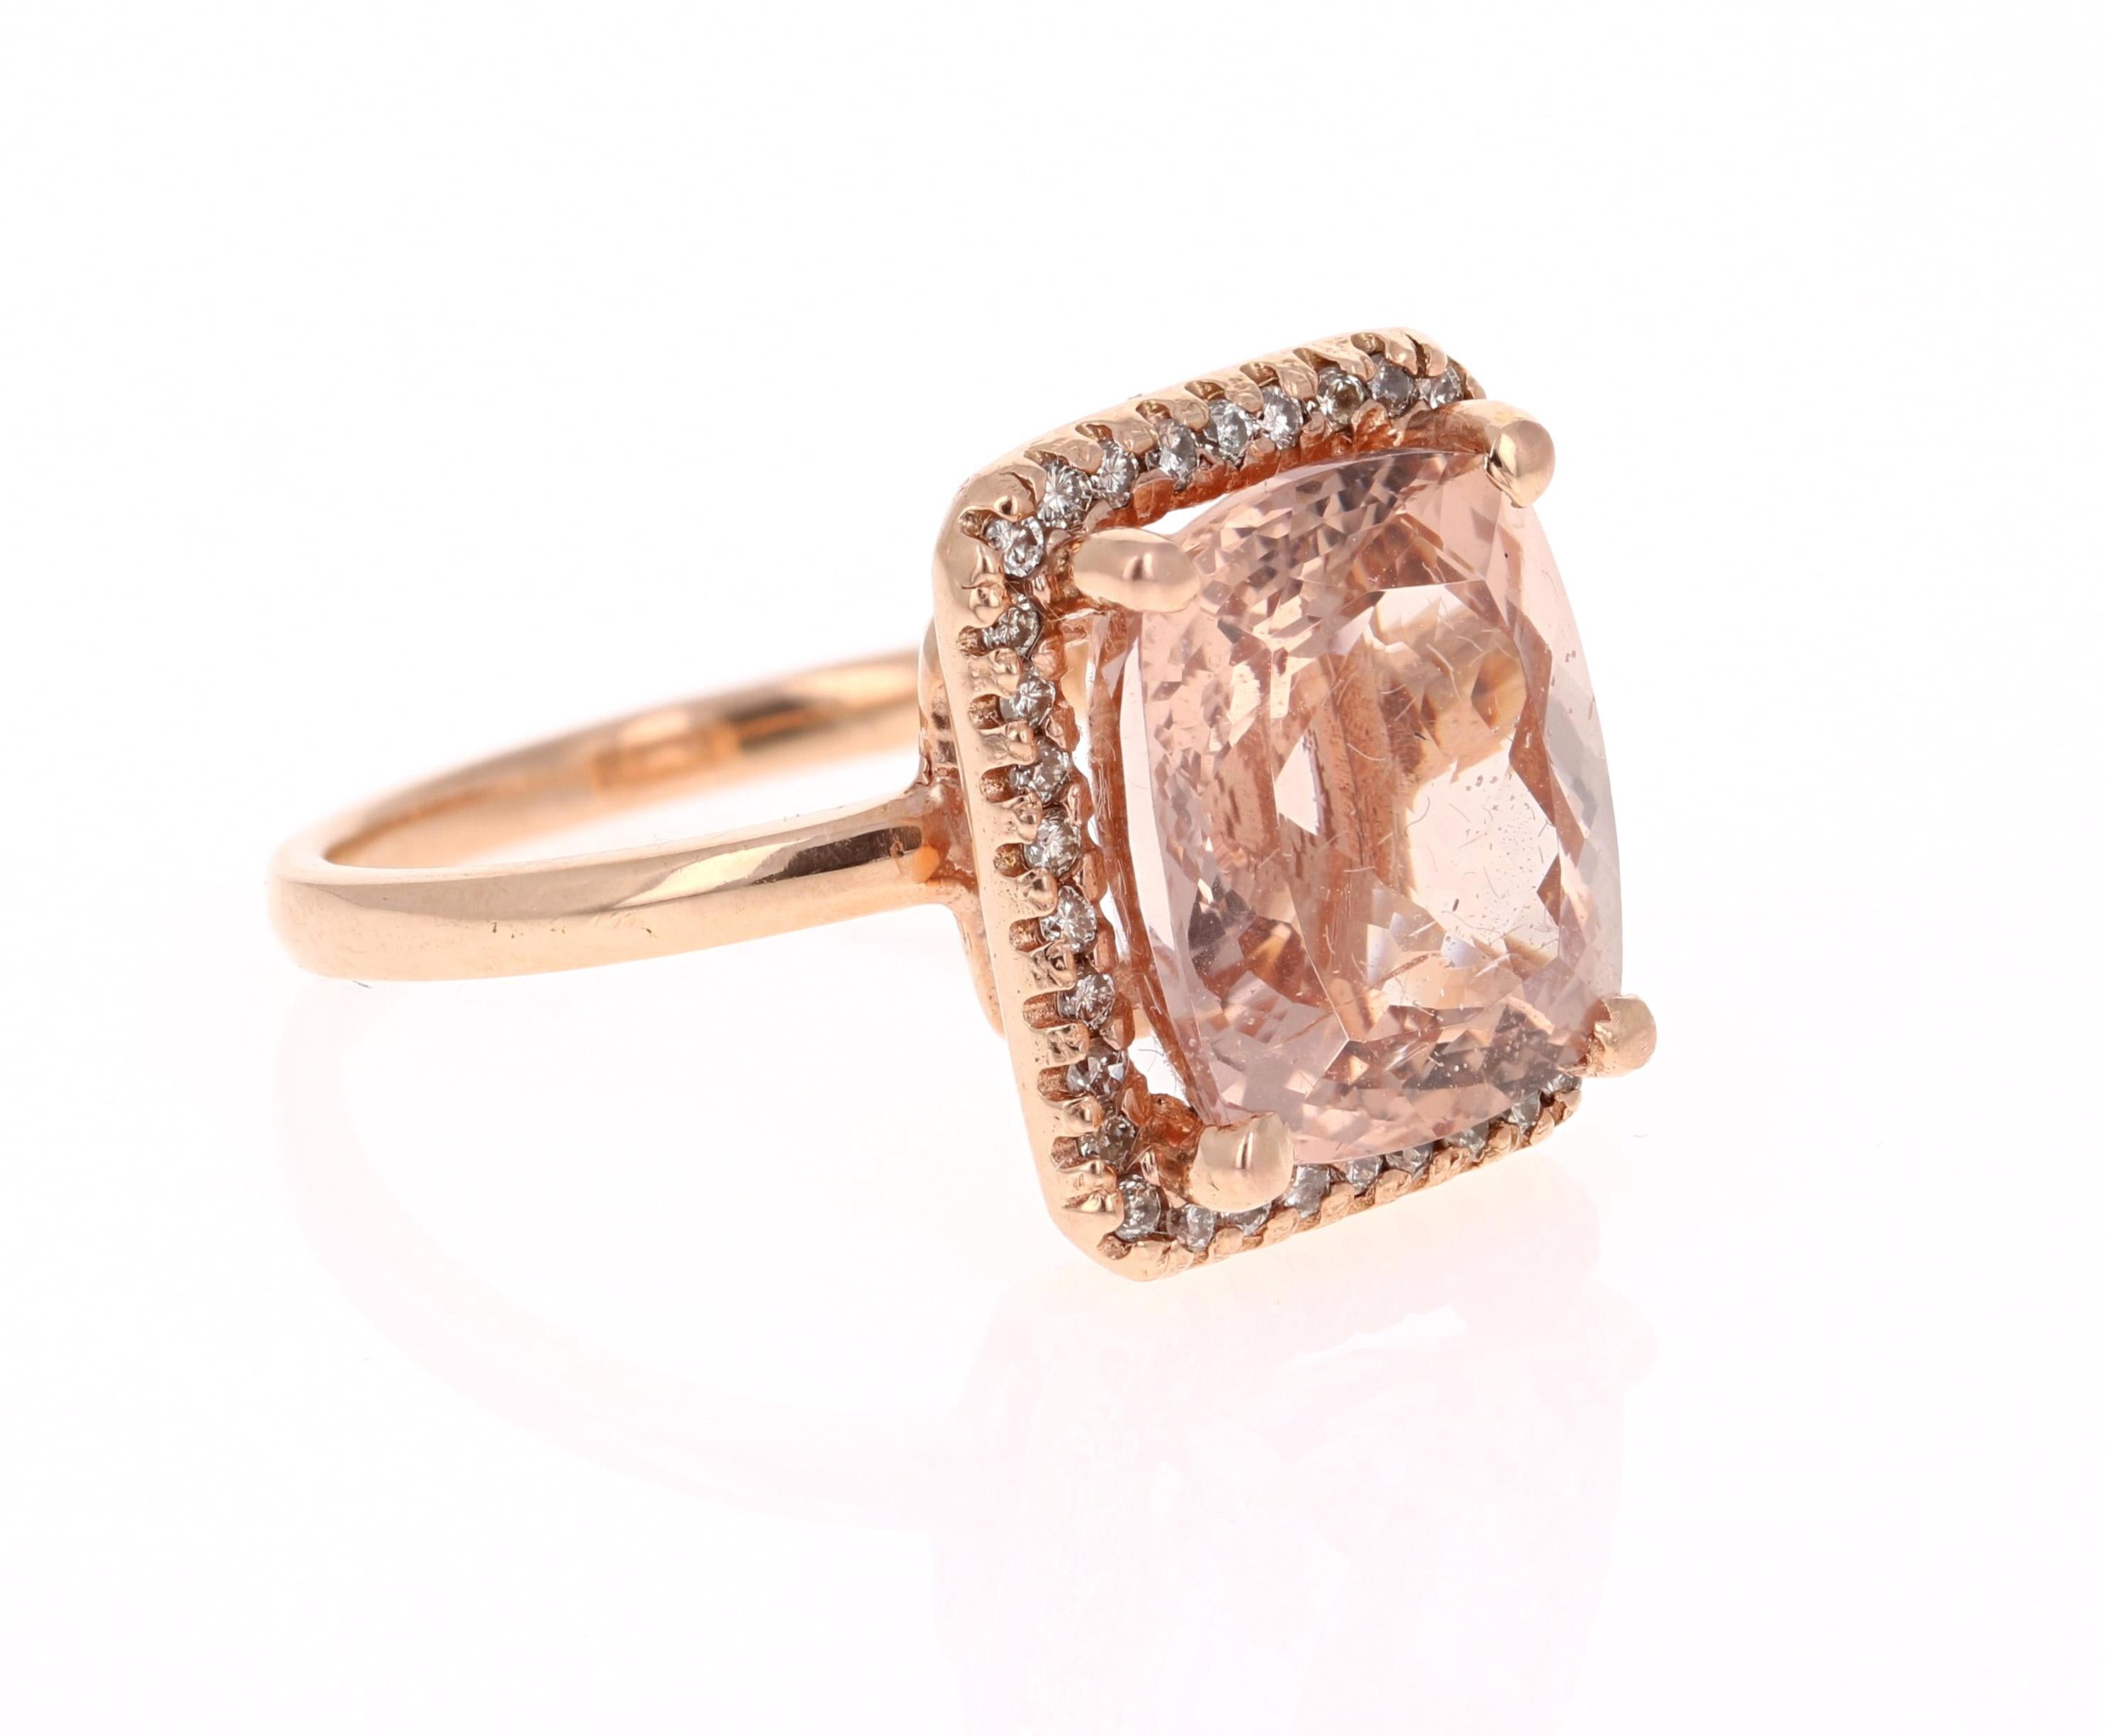 Simply a Stunner!

This Morganite ring has a 7.42 Carat Emerald/Cushion Cut Morganite and is surrounded by 35 Round Cut Diamonds that weigh 0.34 Carats. The clarity and color of the diamonds are VS-I. The total carat weight of the ring is 7.76